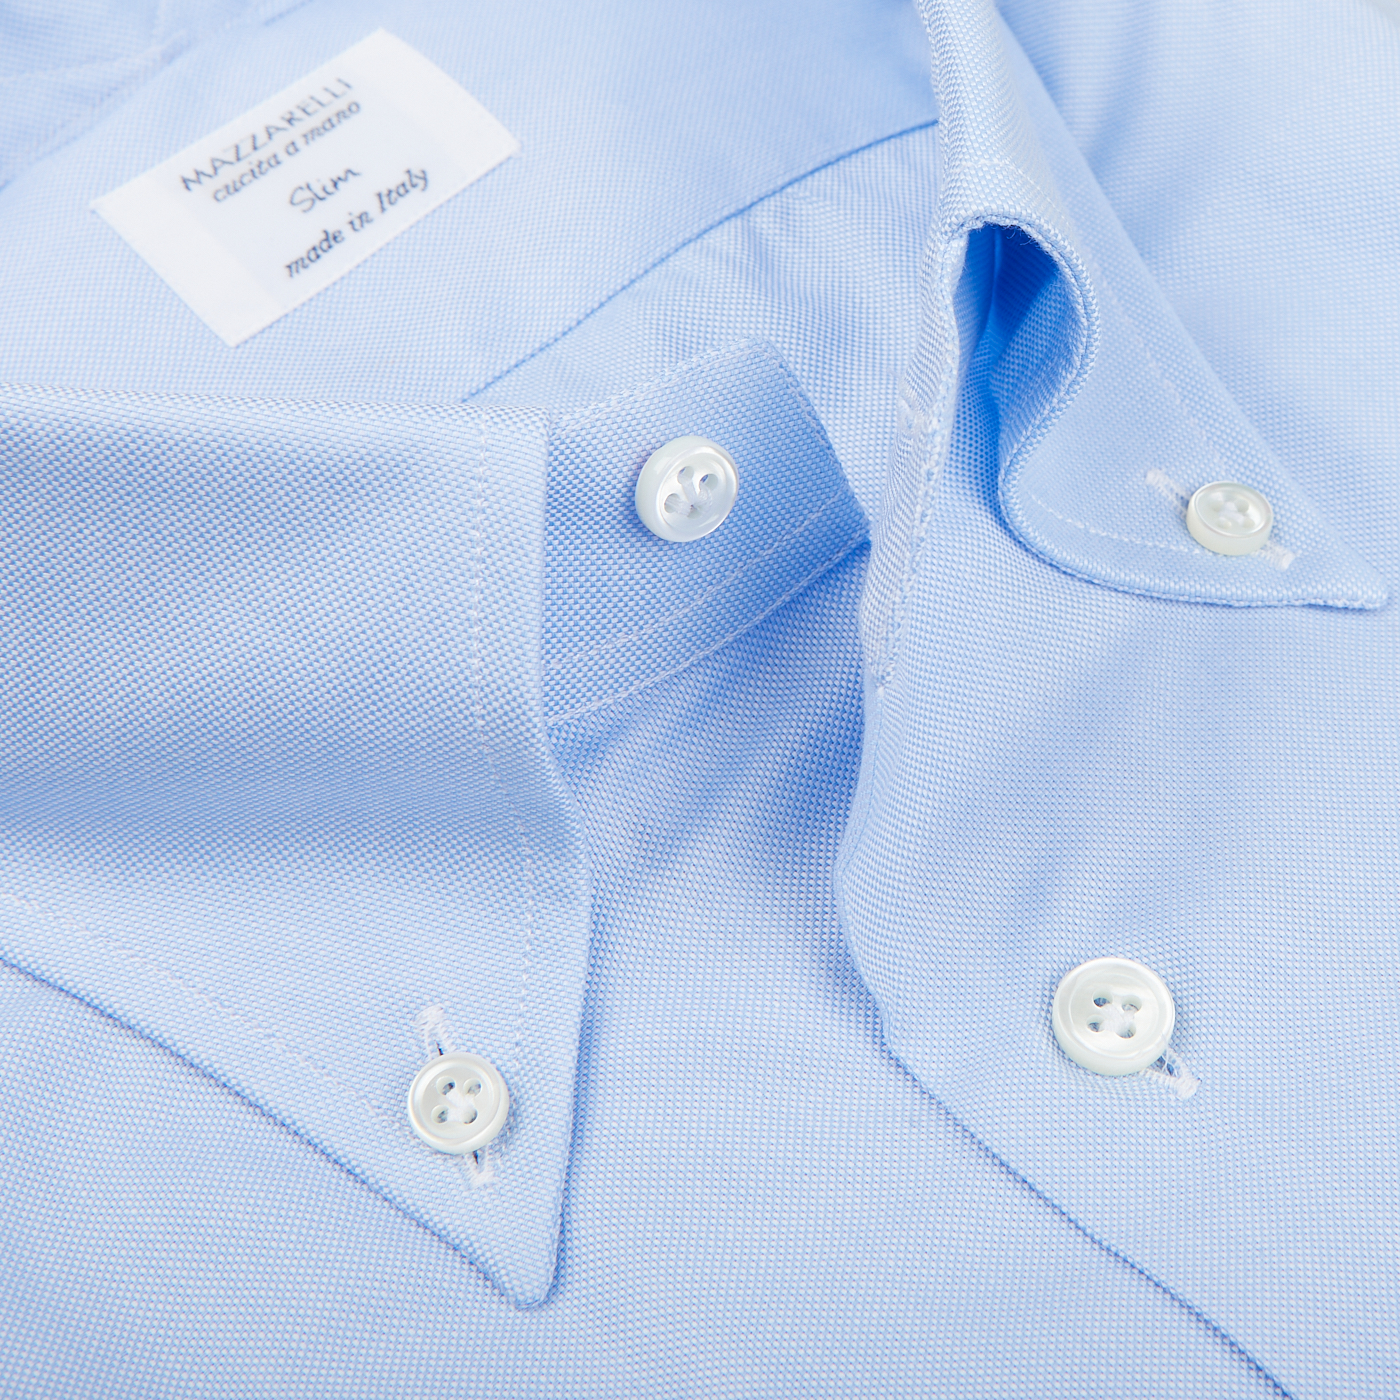 Close-up of a Mazzarelli Light Blue Royal Oxford BD Slim Shirt with white buttons, featuring a collar label that reads "Napoli Tailored - Made in Italy.